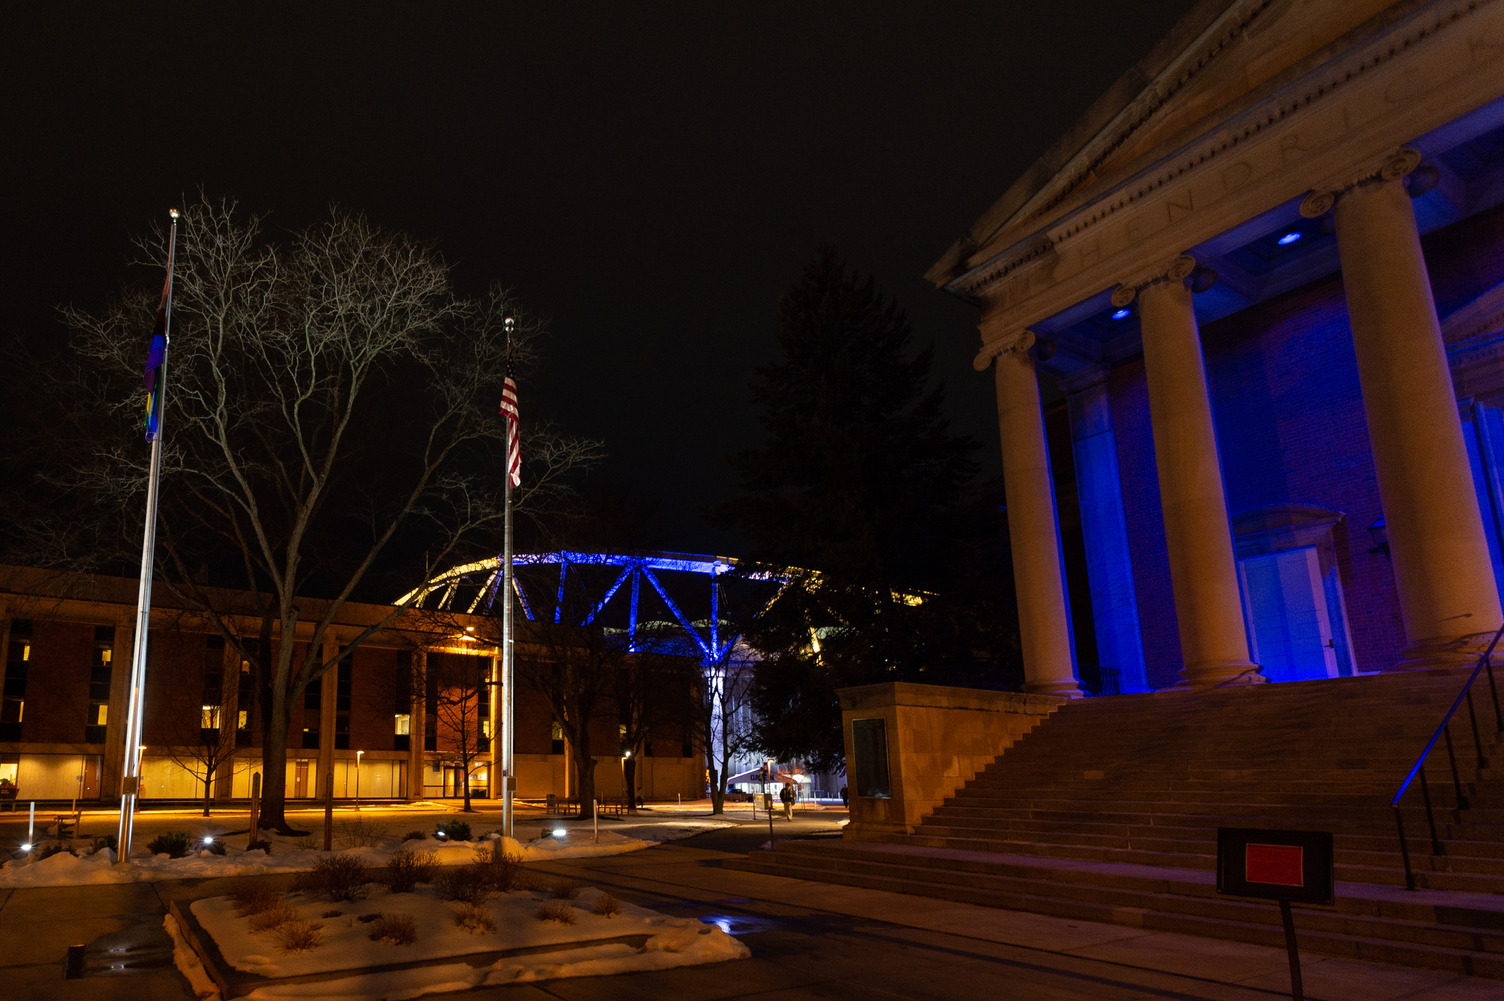 campus buildings at night lit up in blue and yellow